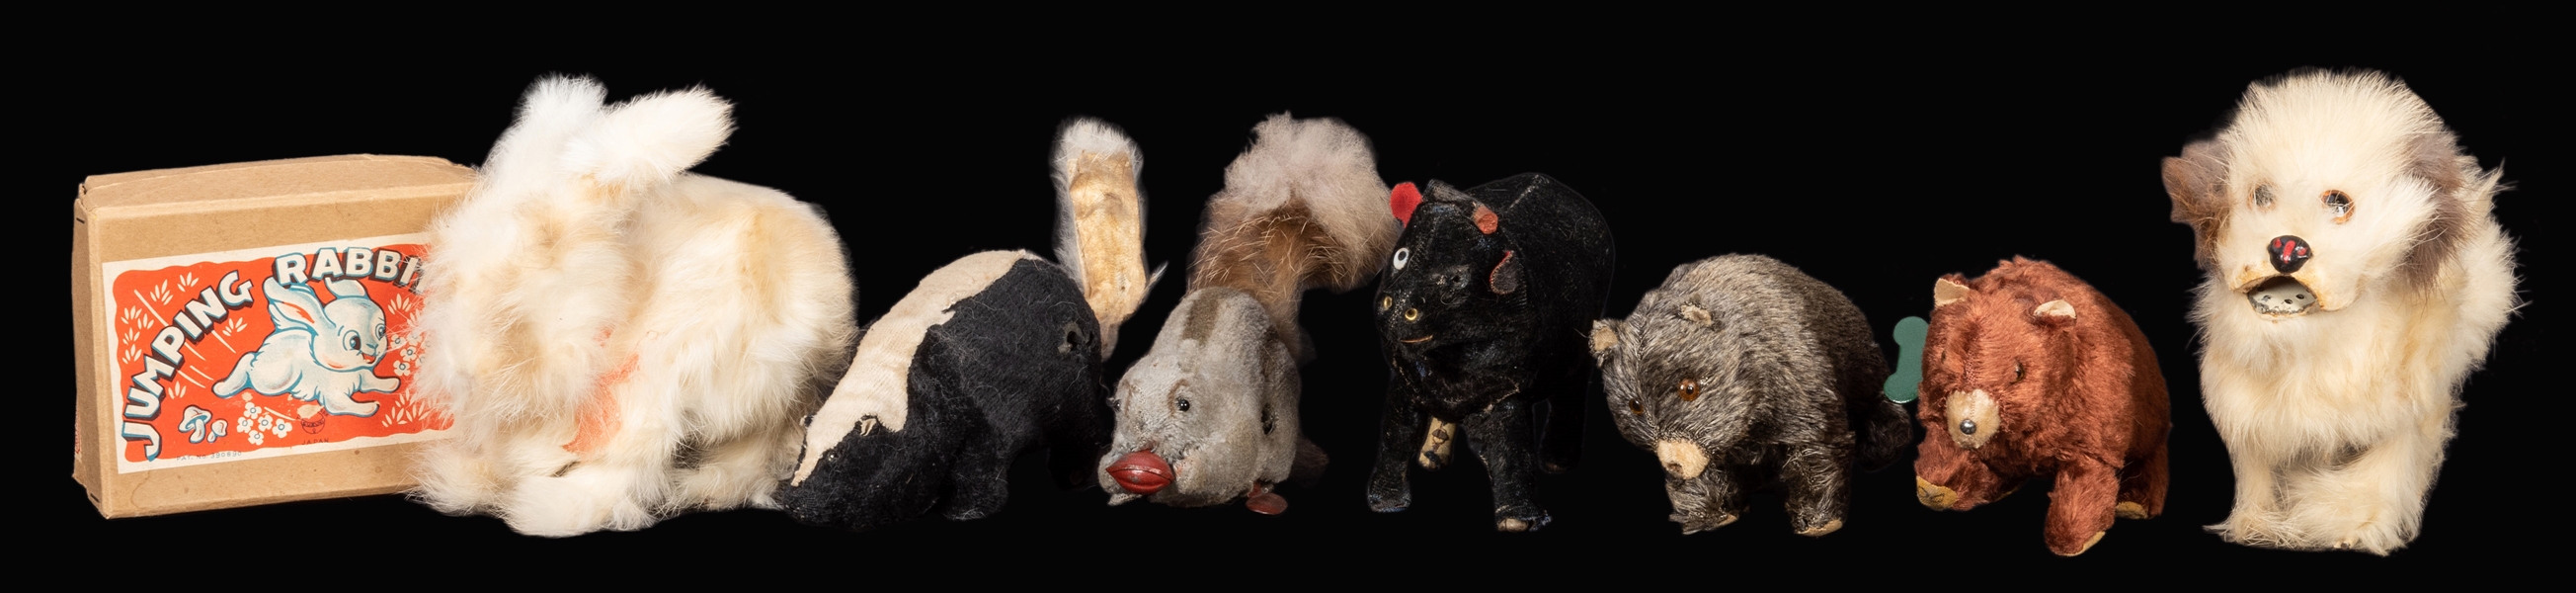 Lot of 7 Wind-Up Animal Toys.